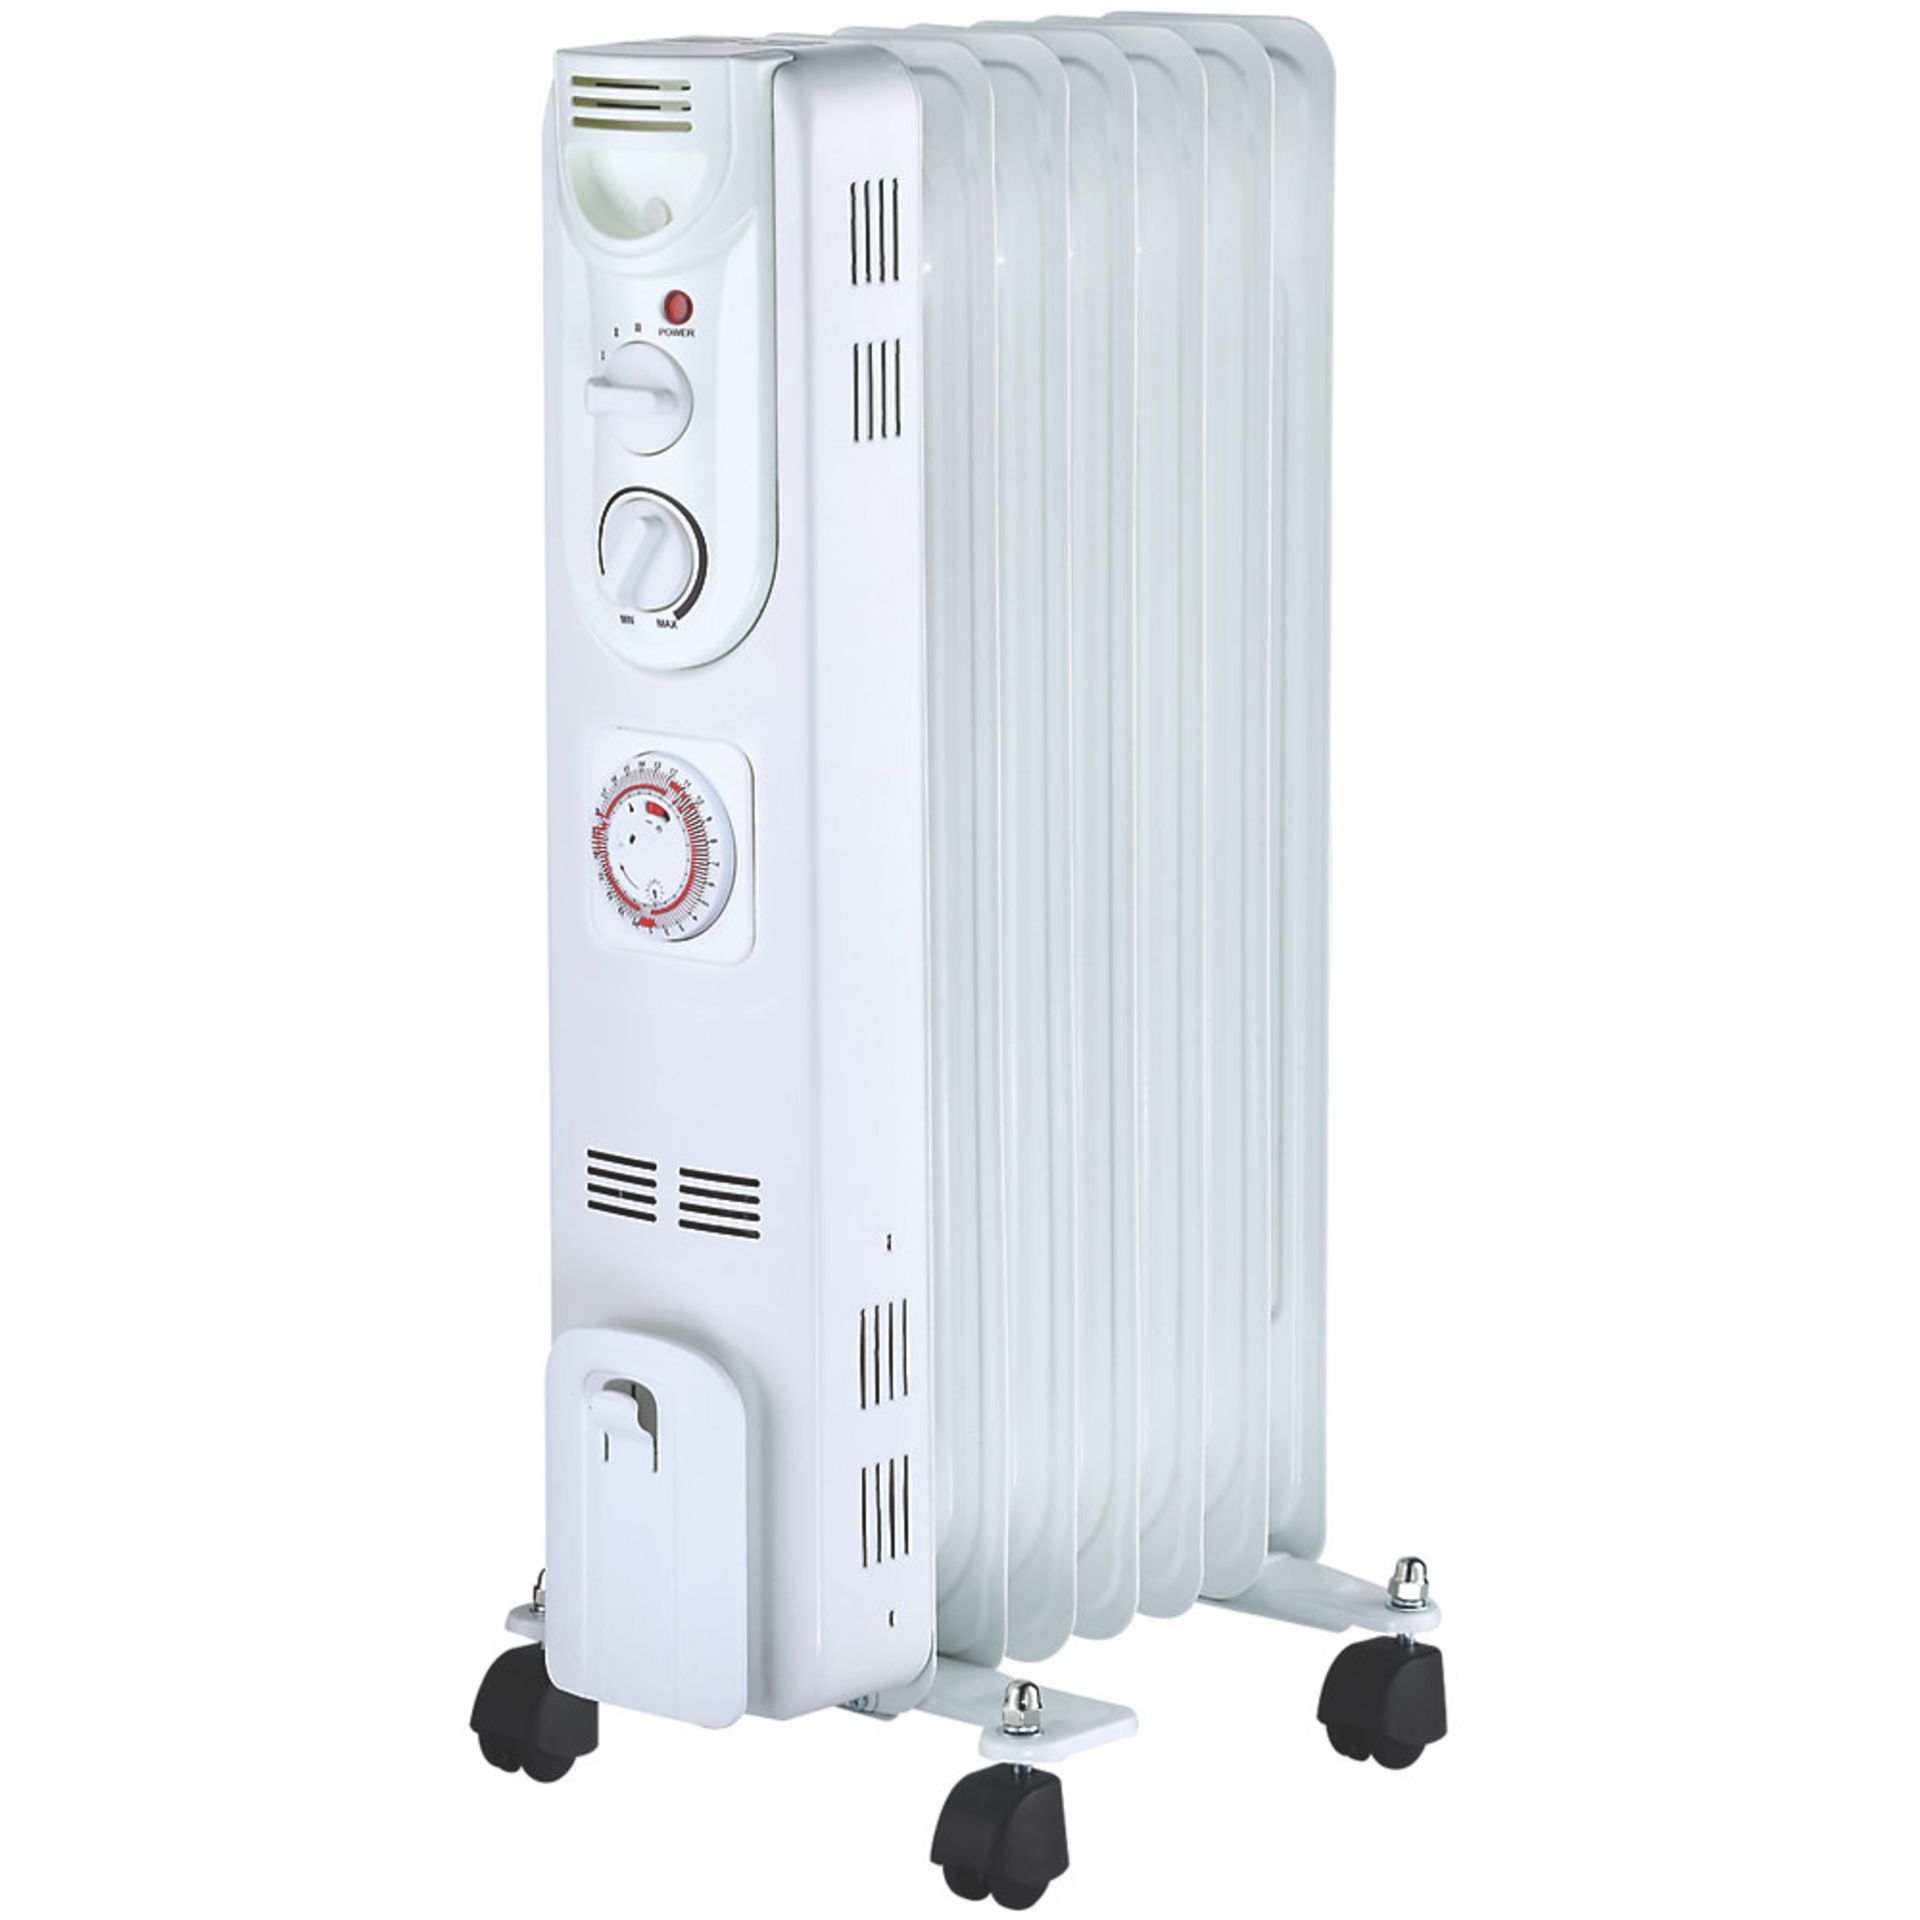 New (A154) Freestanding Oil-Filled Radiator 1500W With Timer.